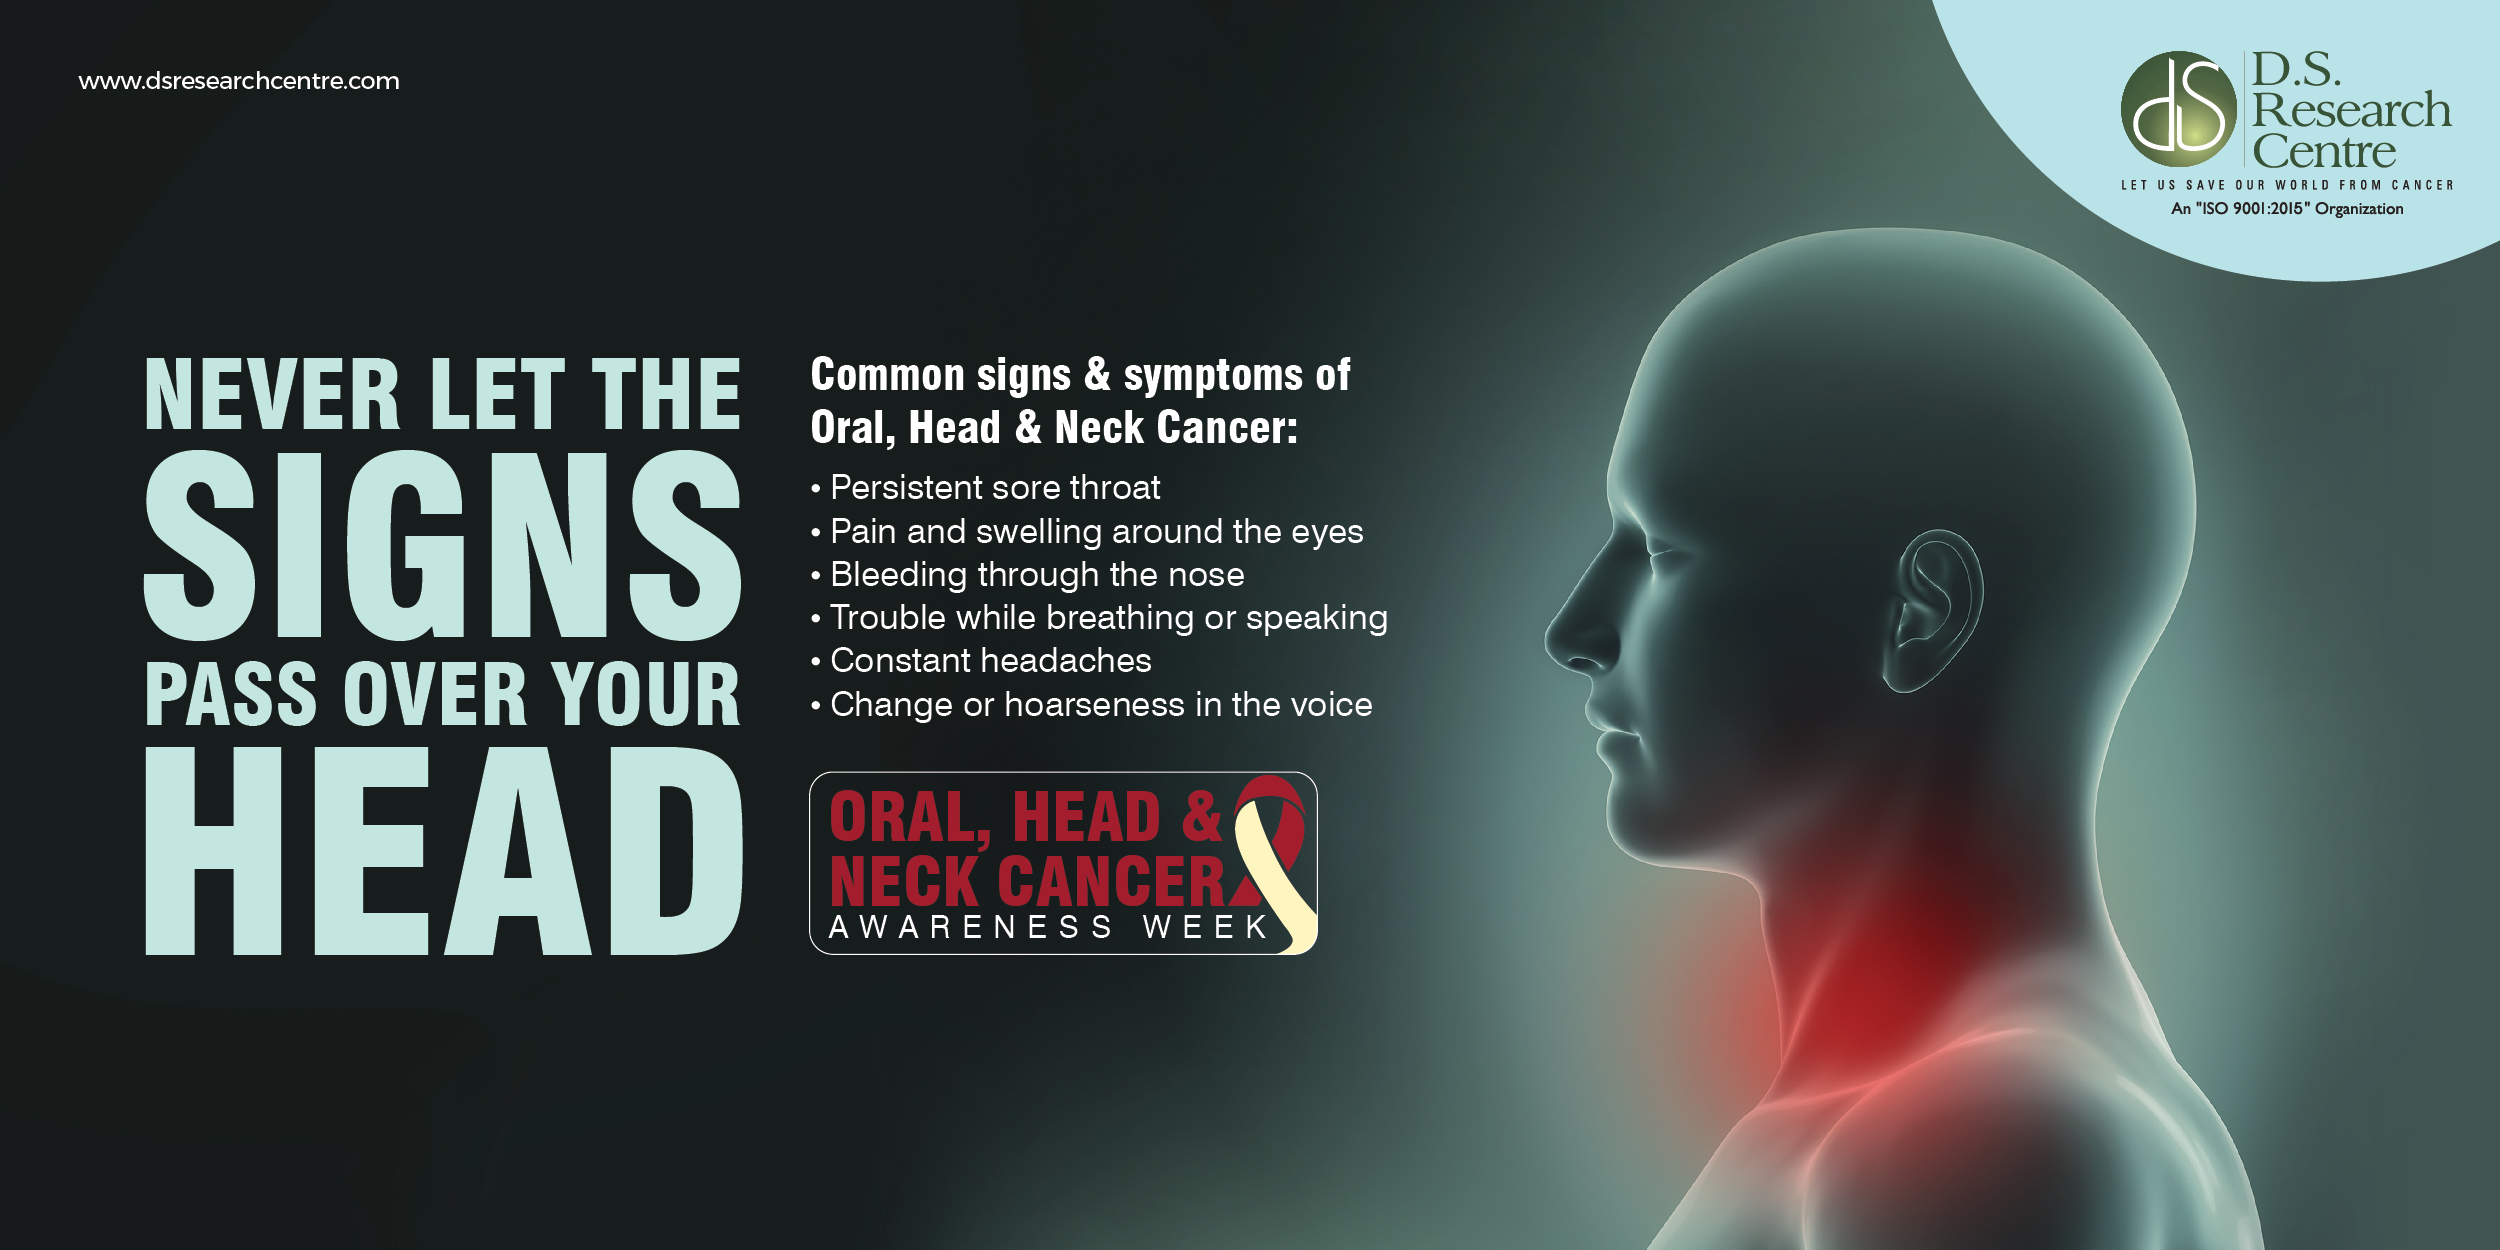 ORAL, HEAD AND NECK CANCER